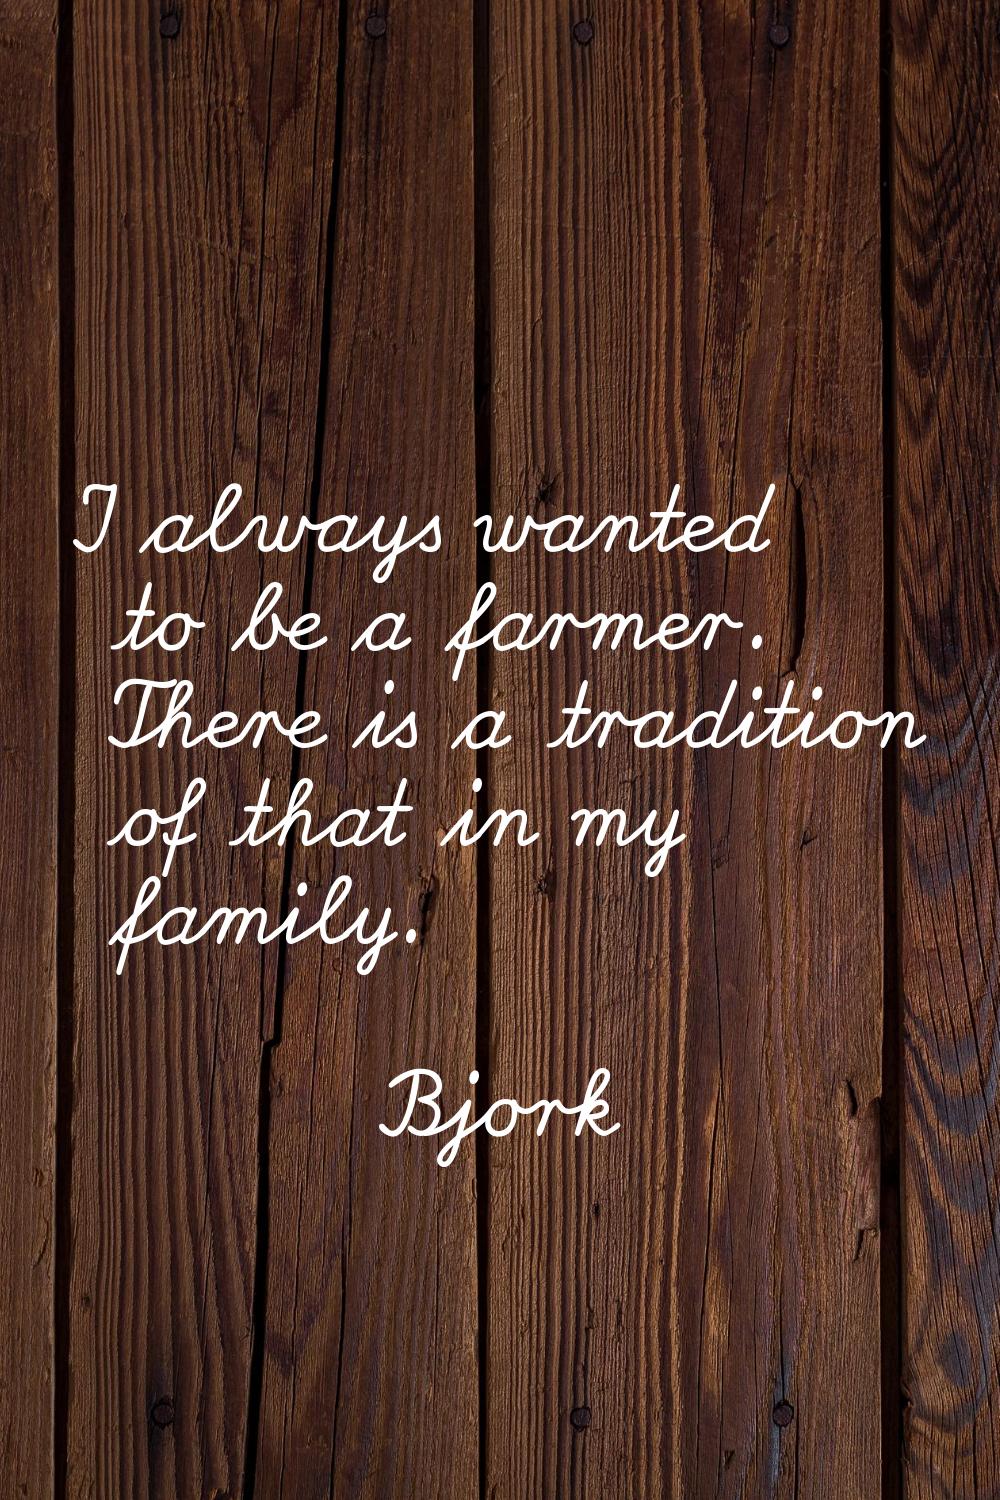 I always wanted to be a farmer. There is a tradition of that in my family.